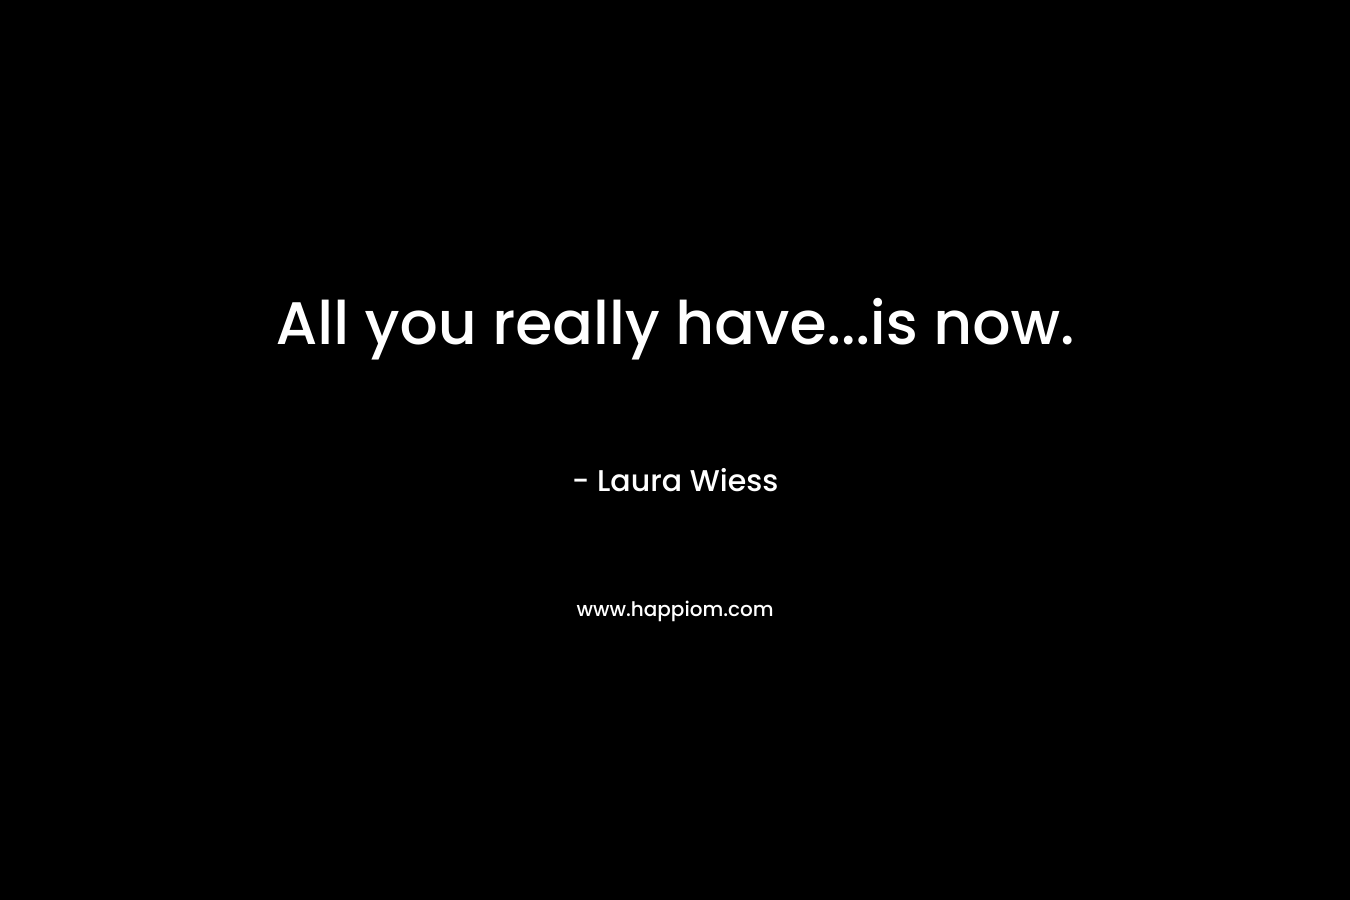 All you really have…is now. – Laura Wiess